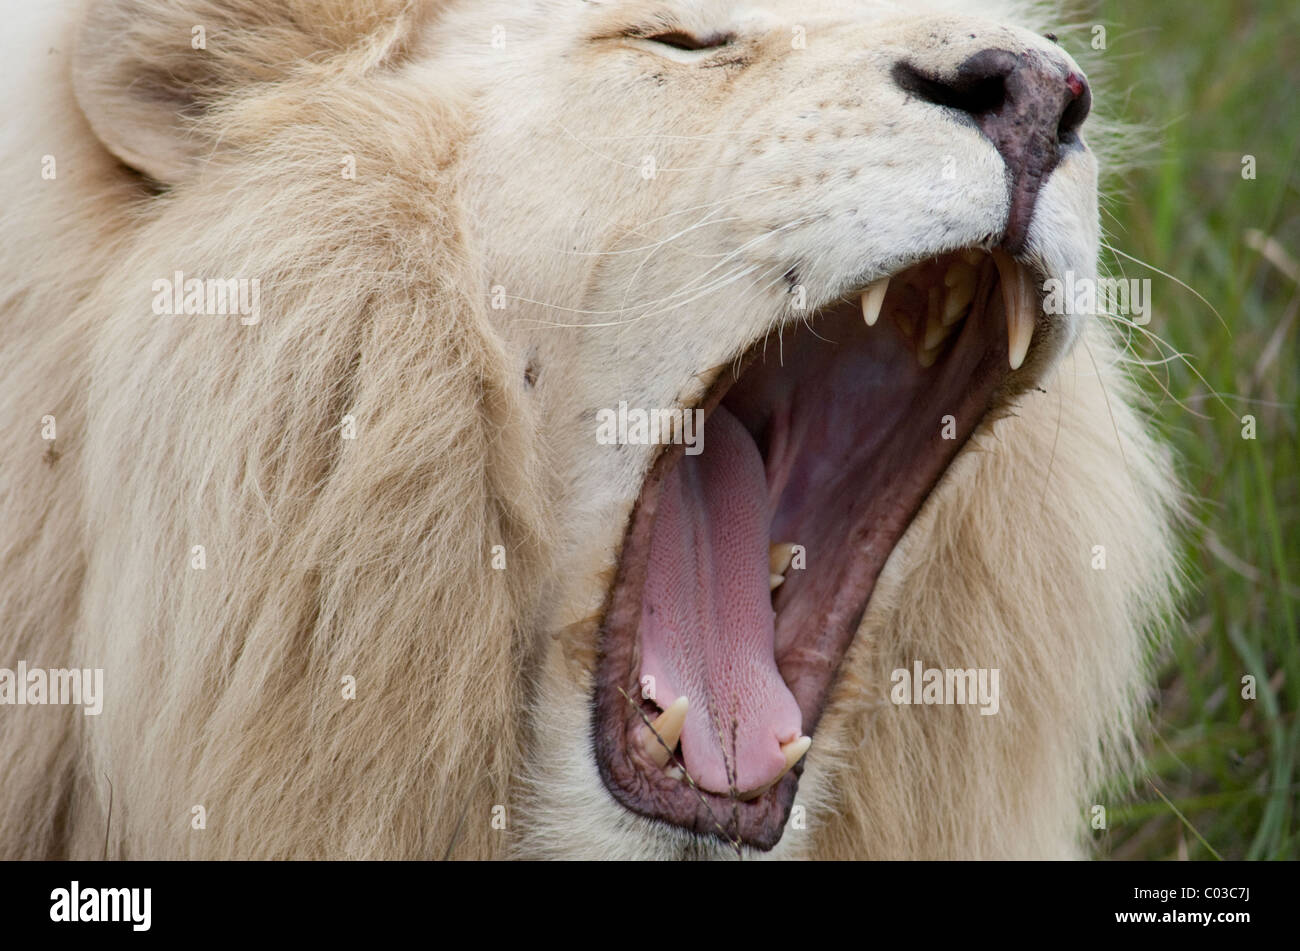 South Africa, Eastern Cape, East London, Inkwenkwezi Private Game Reserve. African lion. Stock Photo